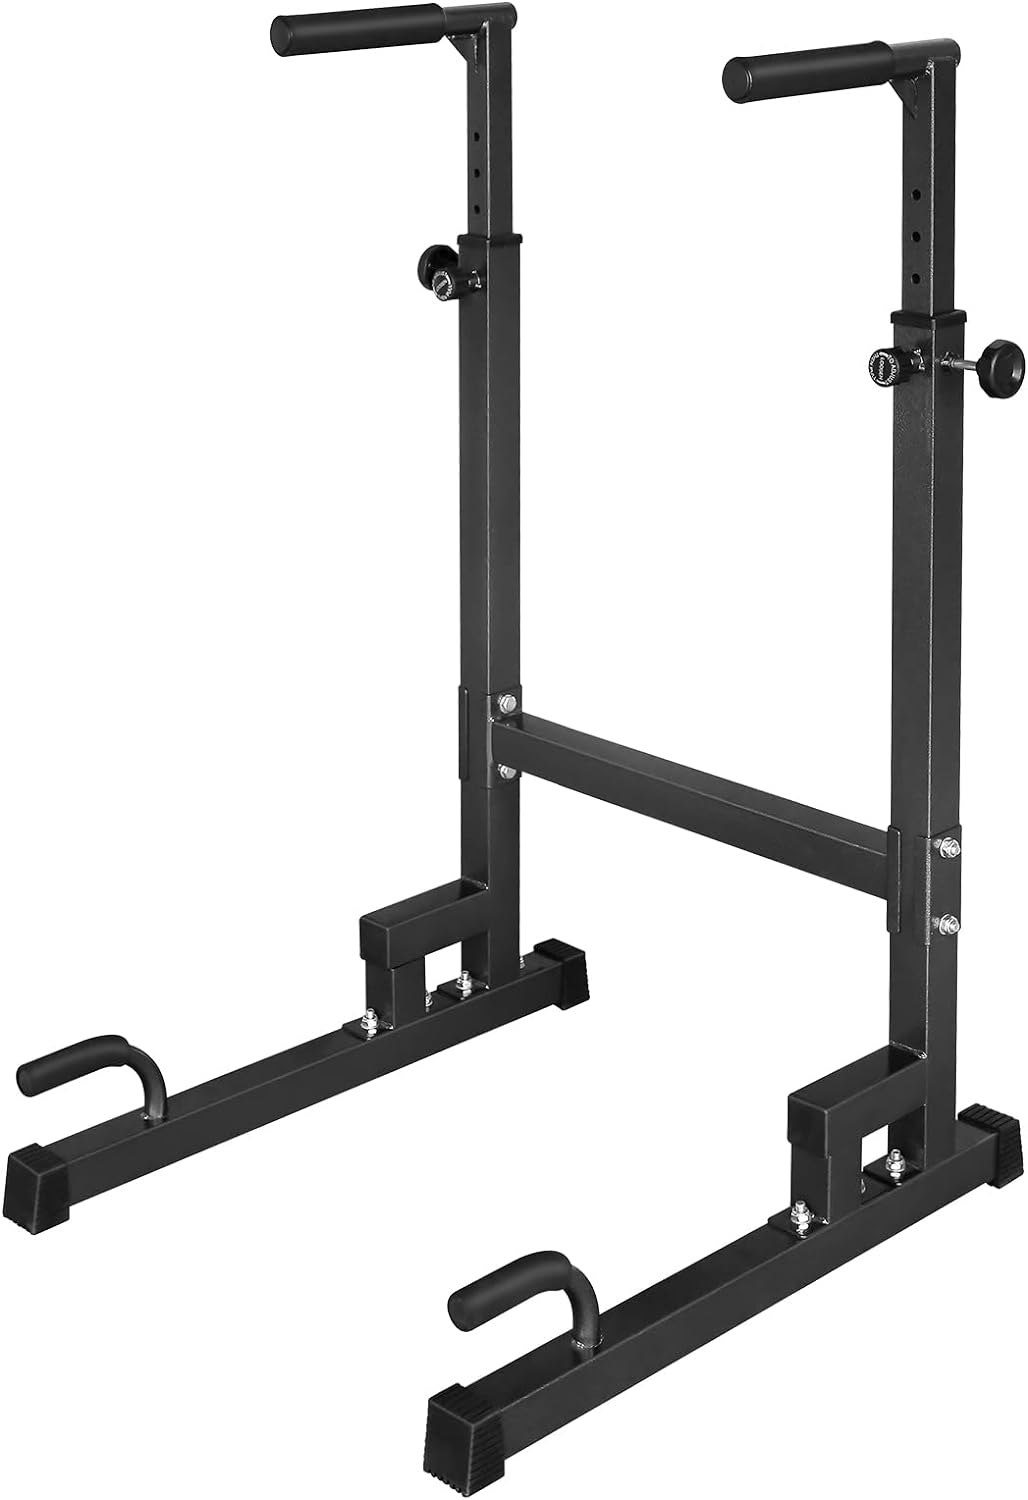 AOKUNG Dip Stand parallel bars, 550 lb capacity heavy-duty dip bar push-ups with foam handles for home or gym fitness exercises